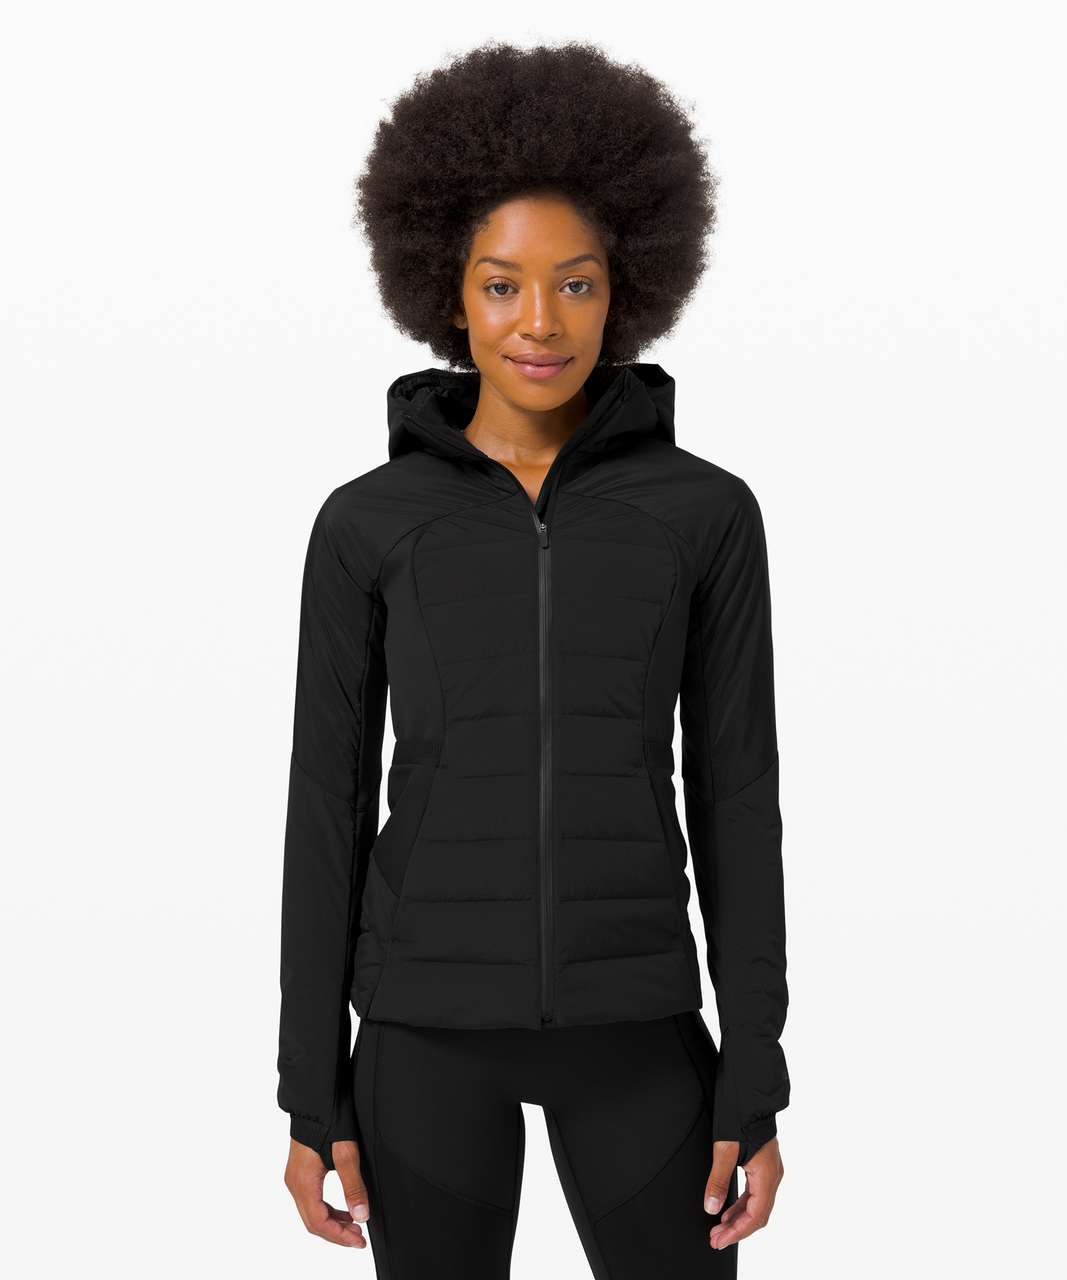 Lululemon Down For It All Jacket - Black (Third Release)